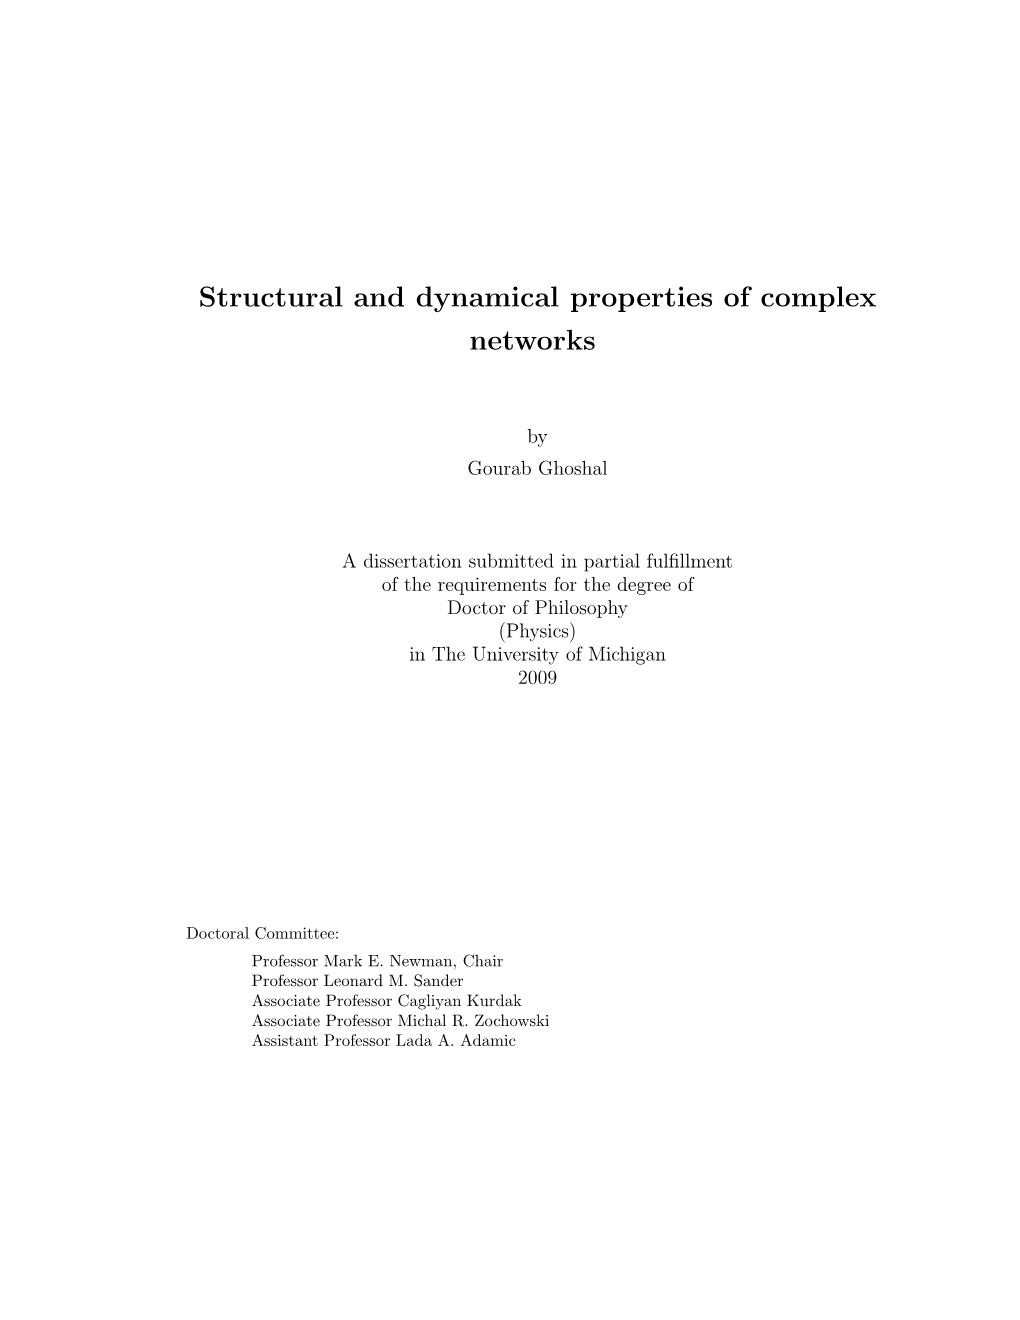 Structural and Dynamical Properties of Complex Networks